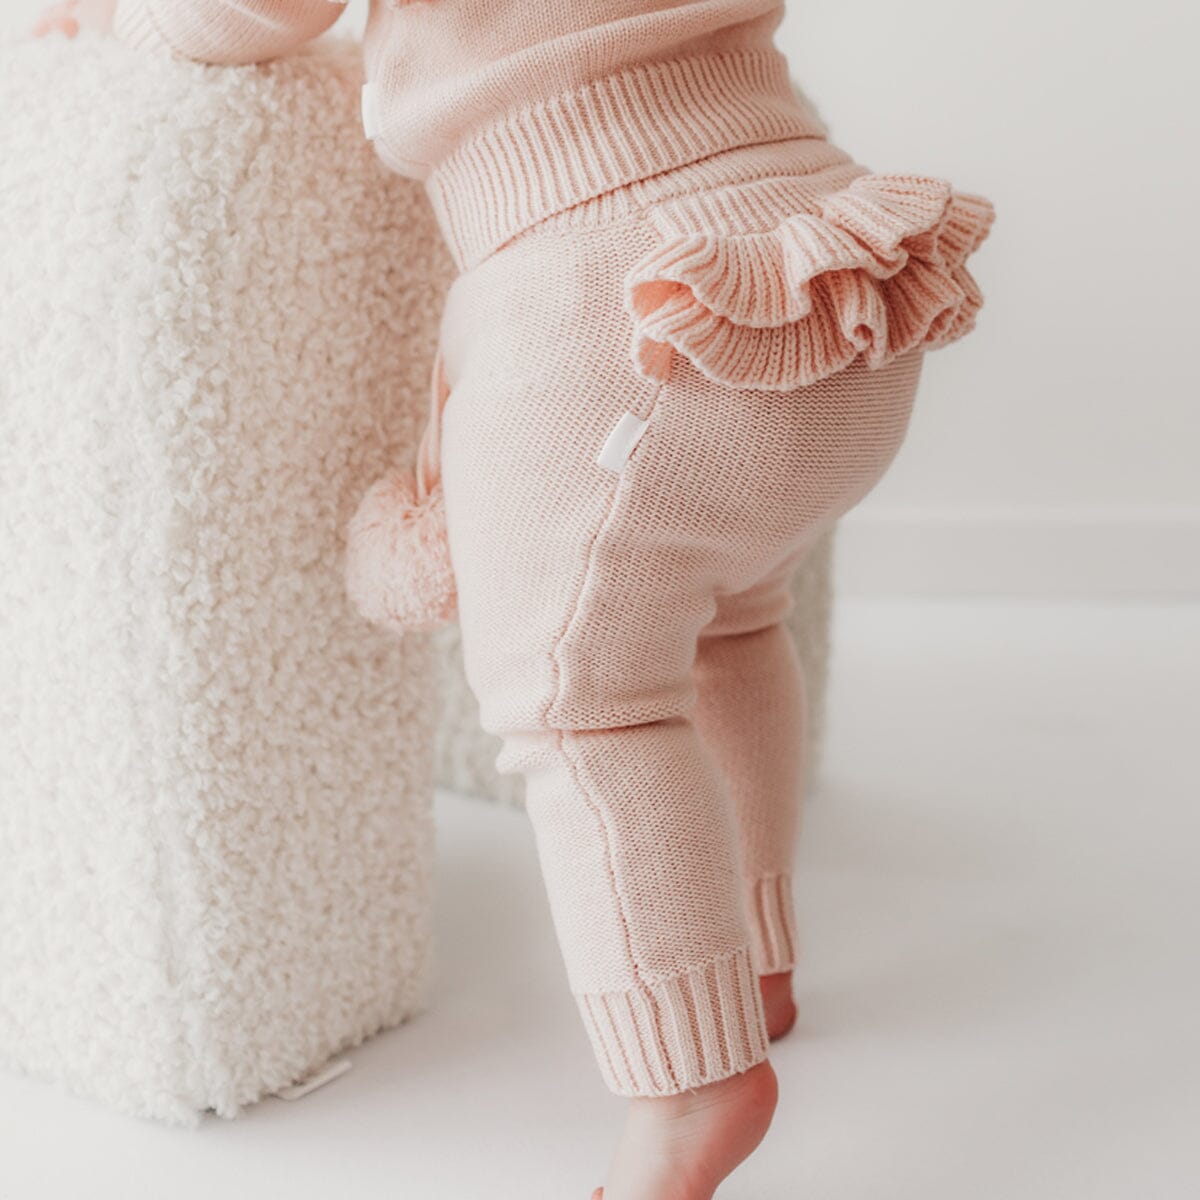 Pink - Frilly Pants - Little Angel Delights